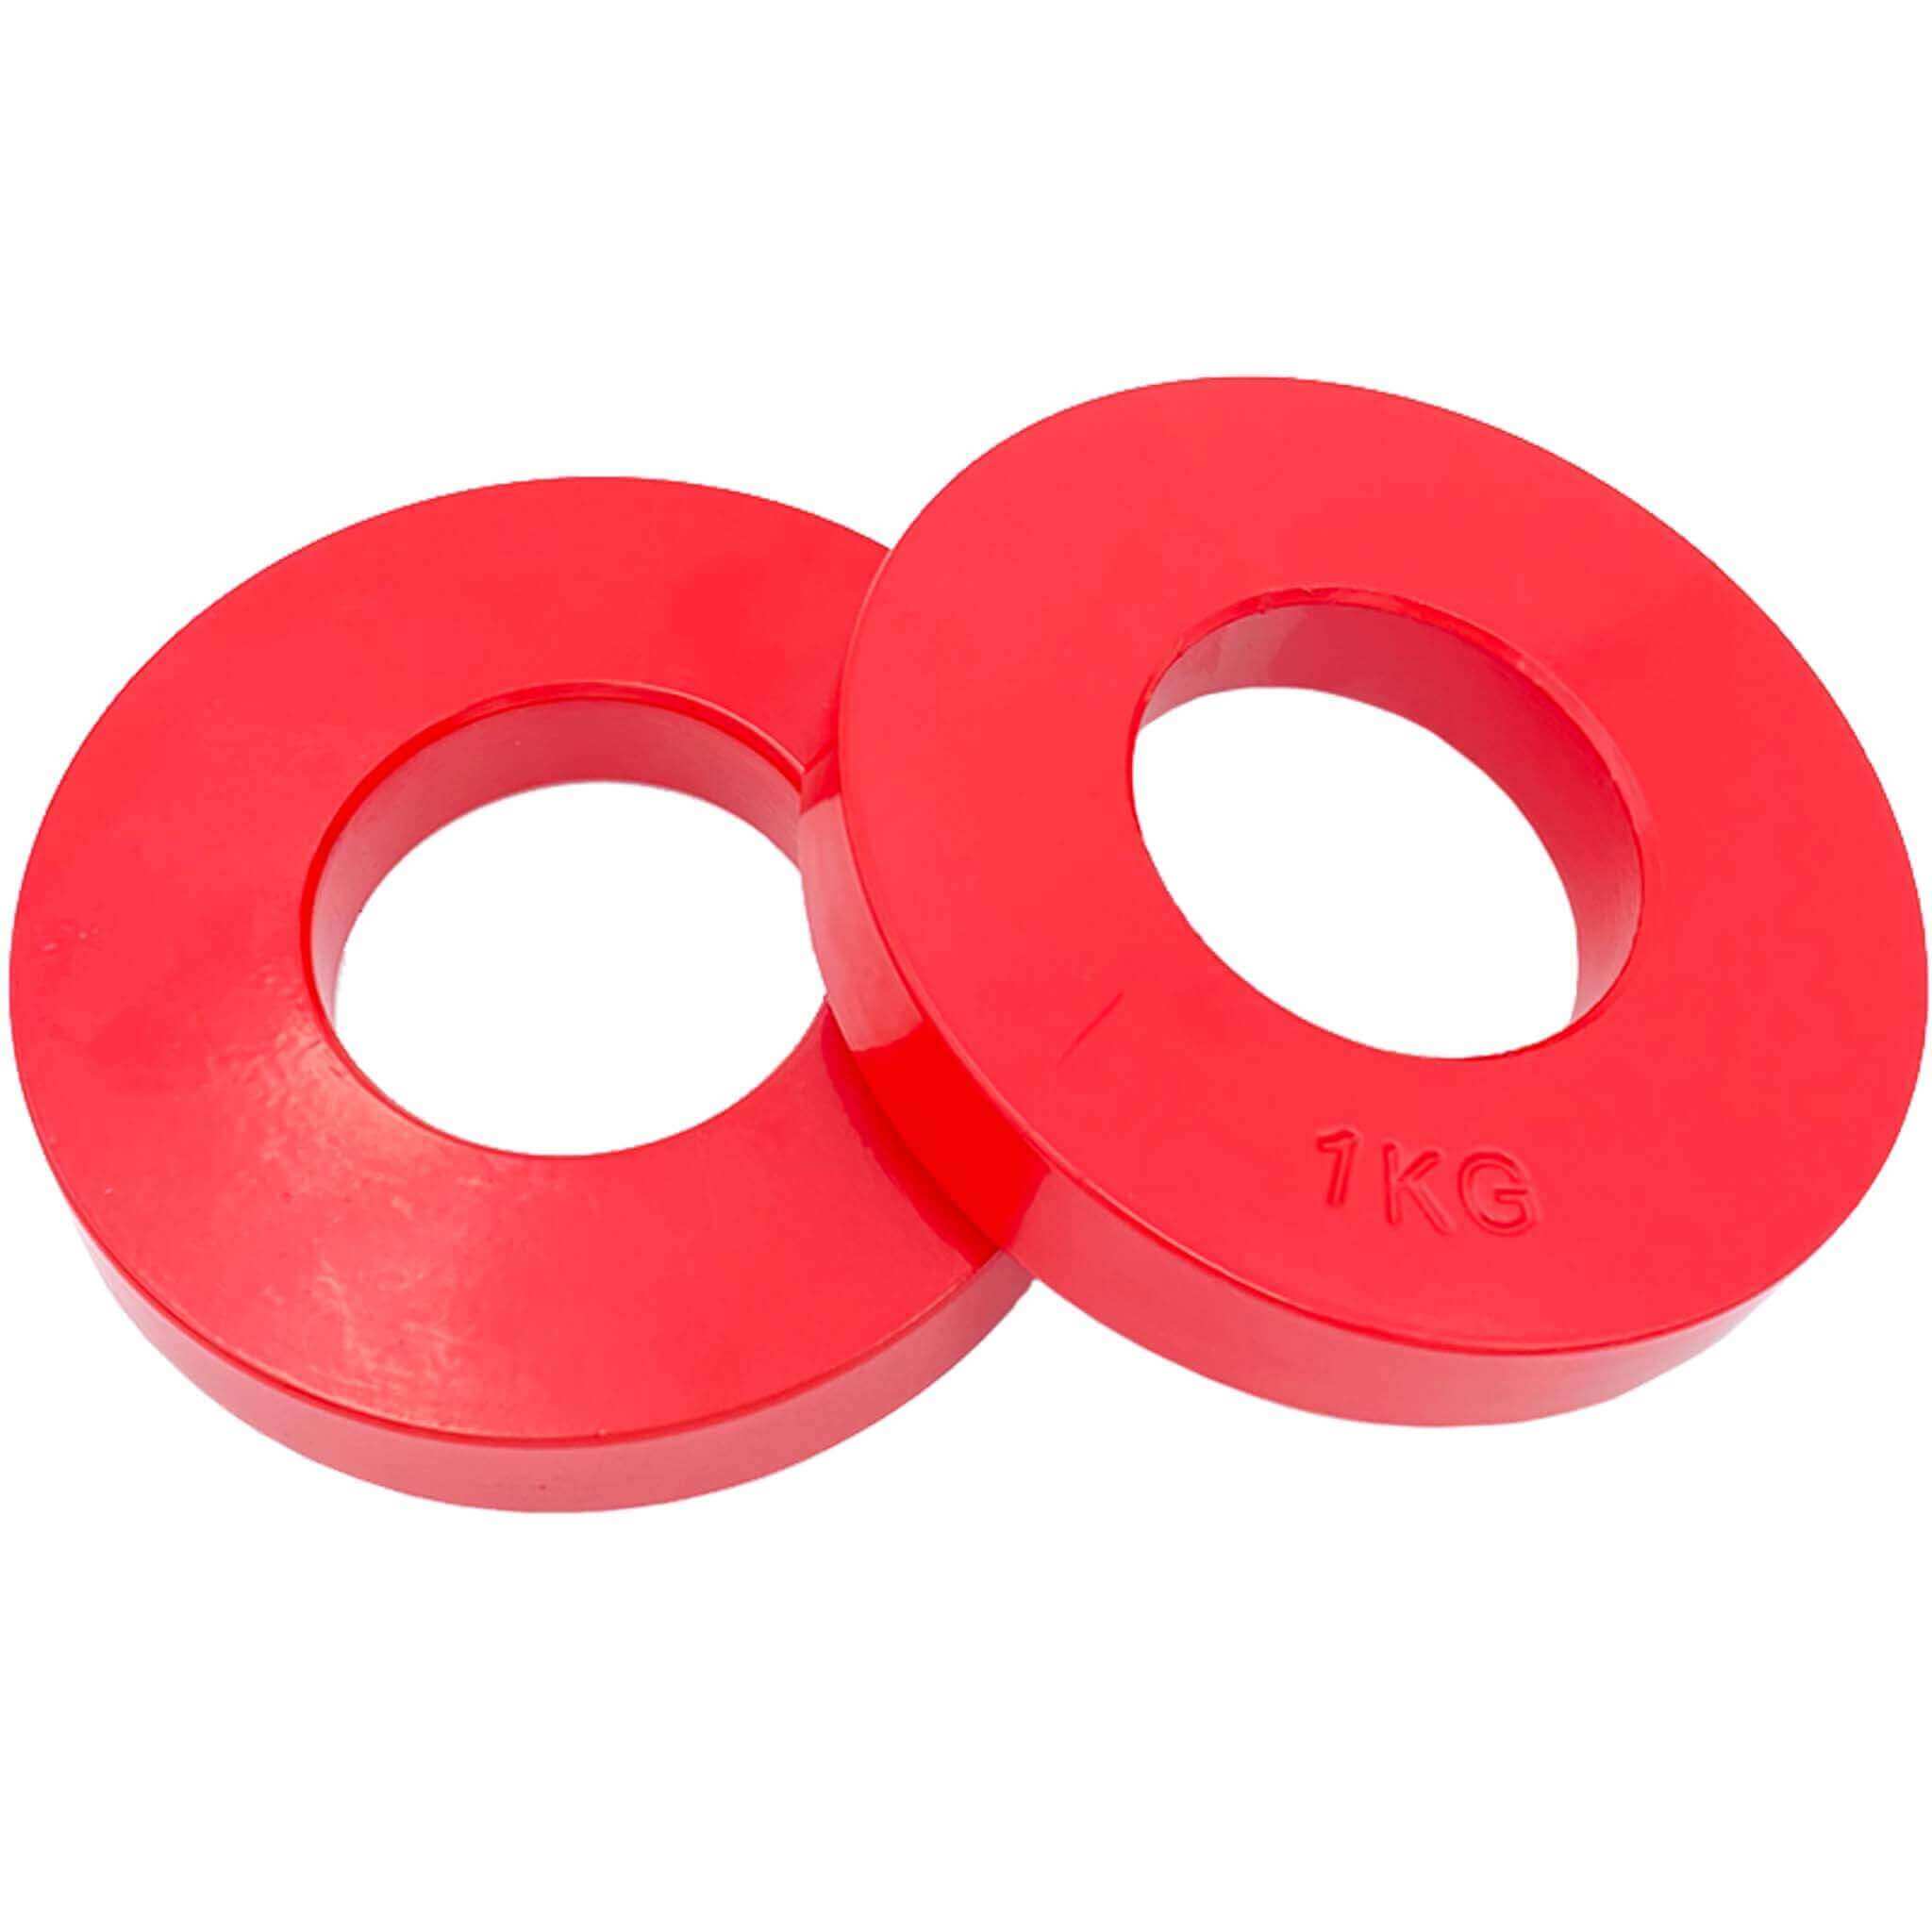 1kg Steel Fractional Plates Pair | INSOURCE